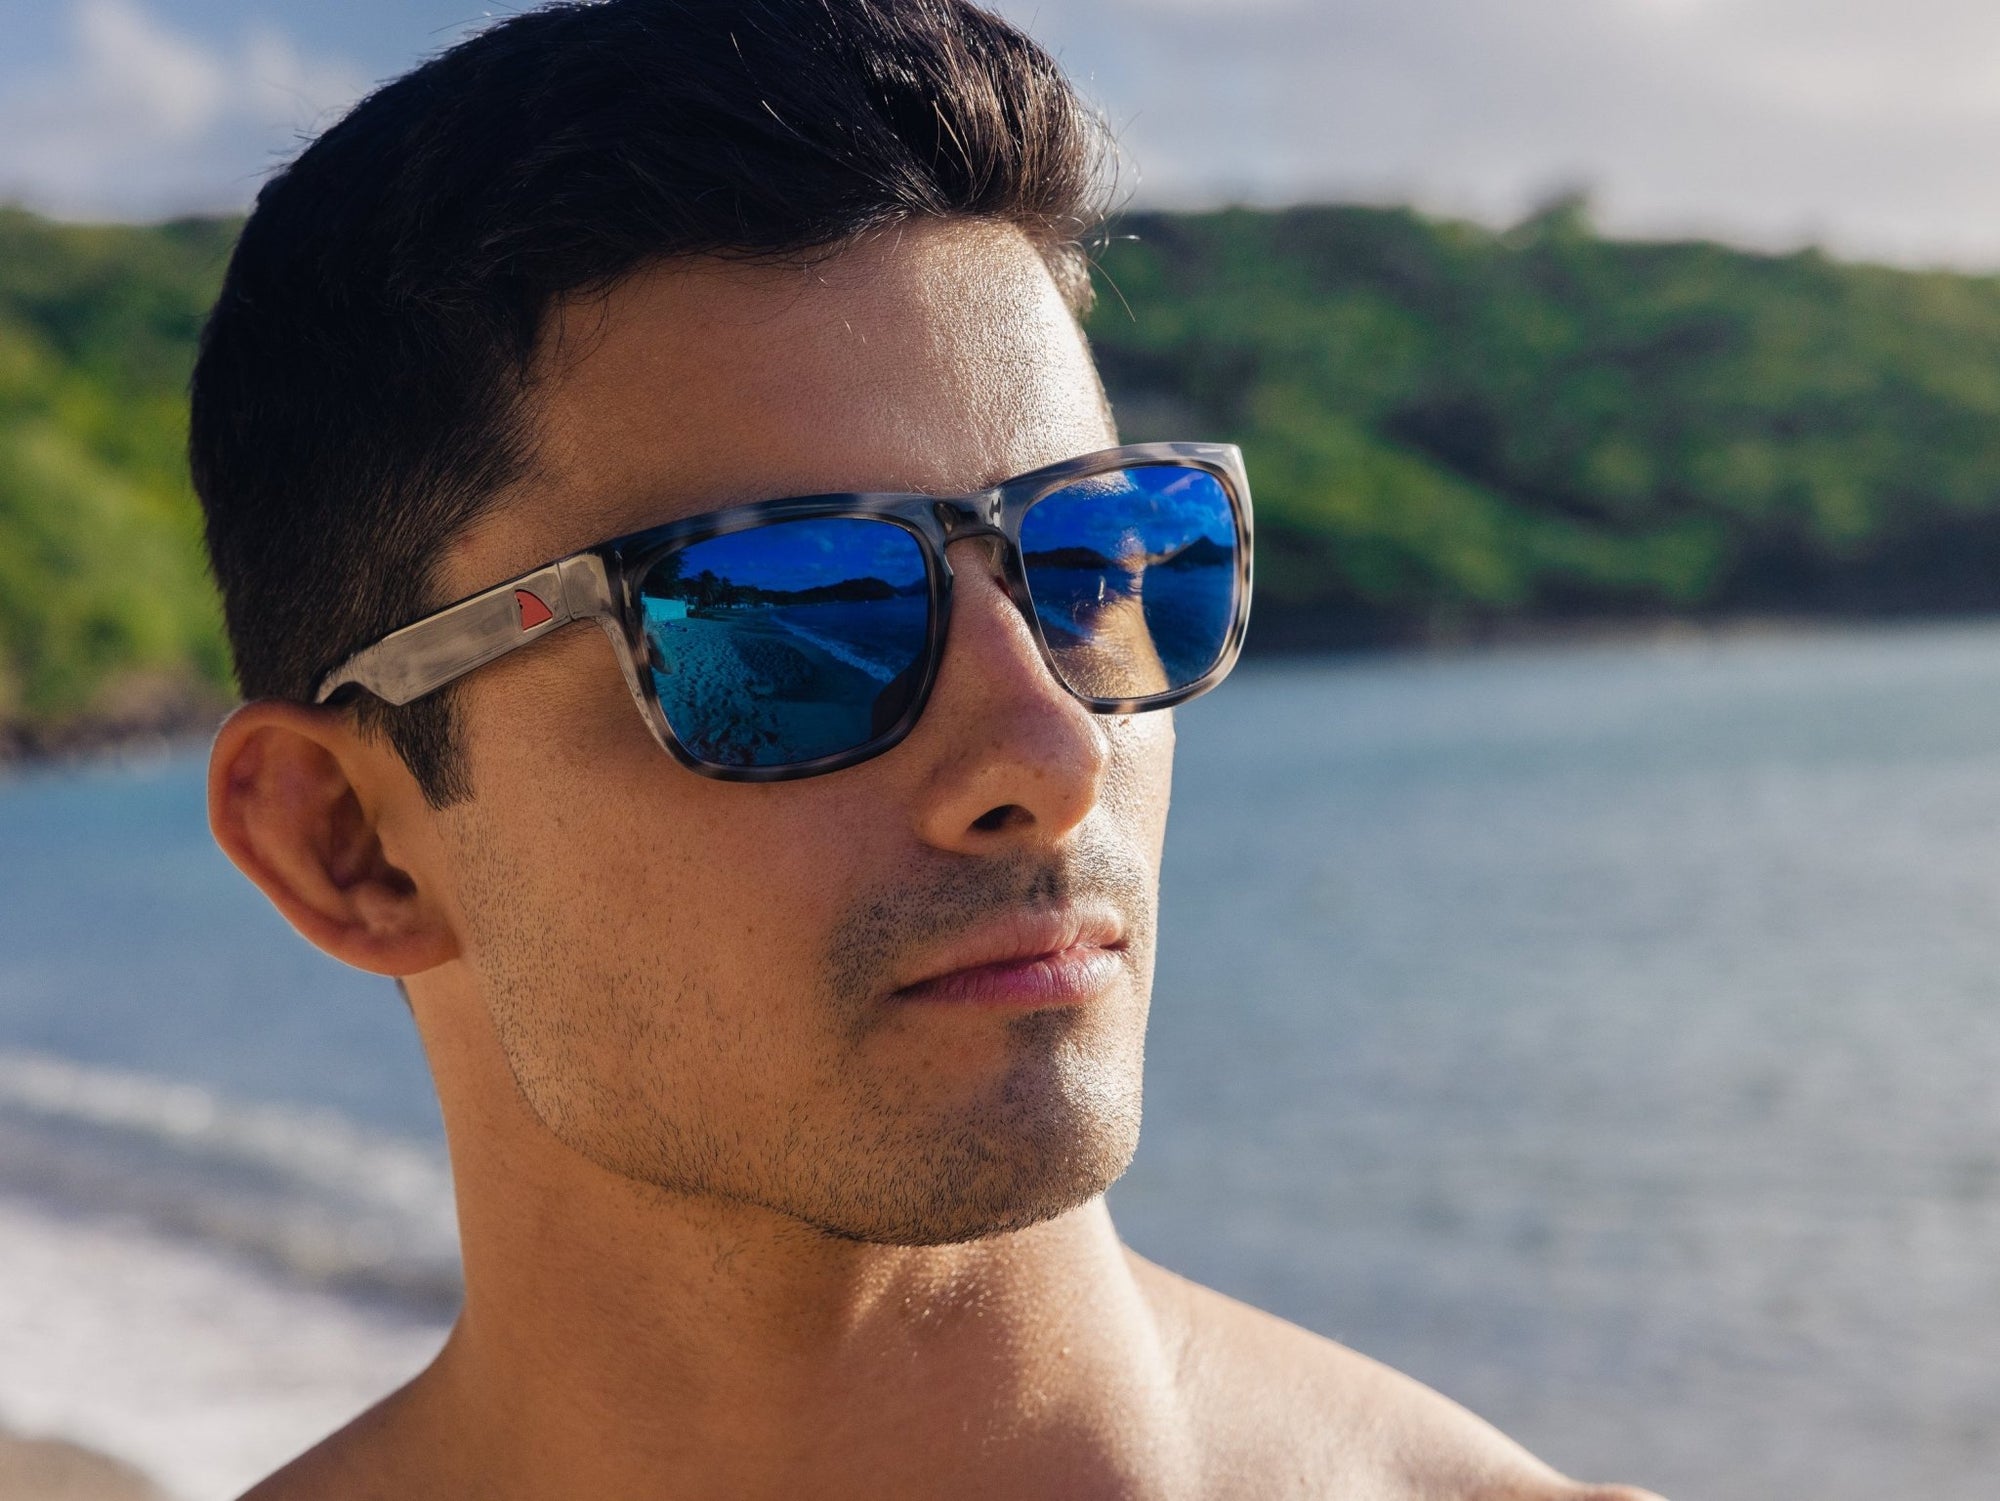 https://redfinpolarized.com/cdn/shop/articles/dont-get-burned-why-redfin-polarized-sunglasses-are-a-must-have-for-summer-355605_2000x.jpg?v=1700582880